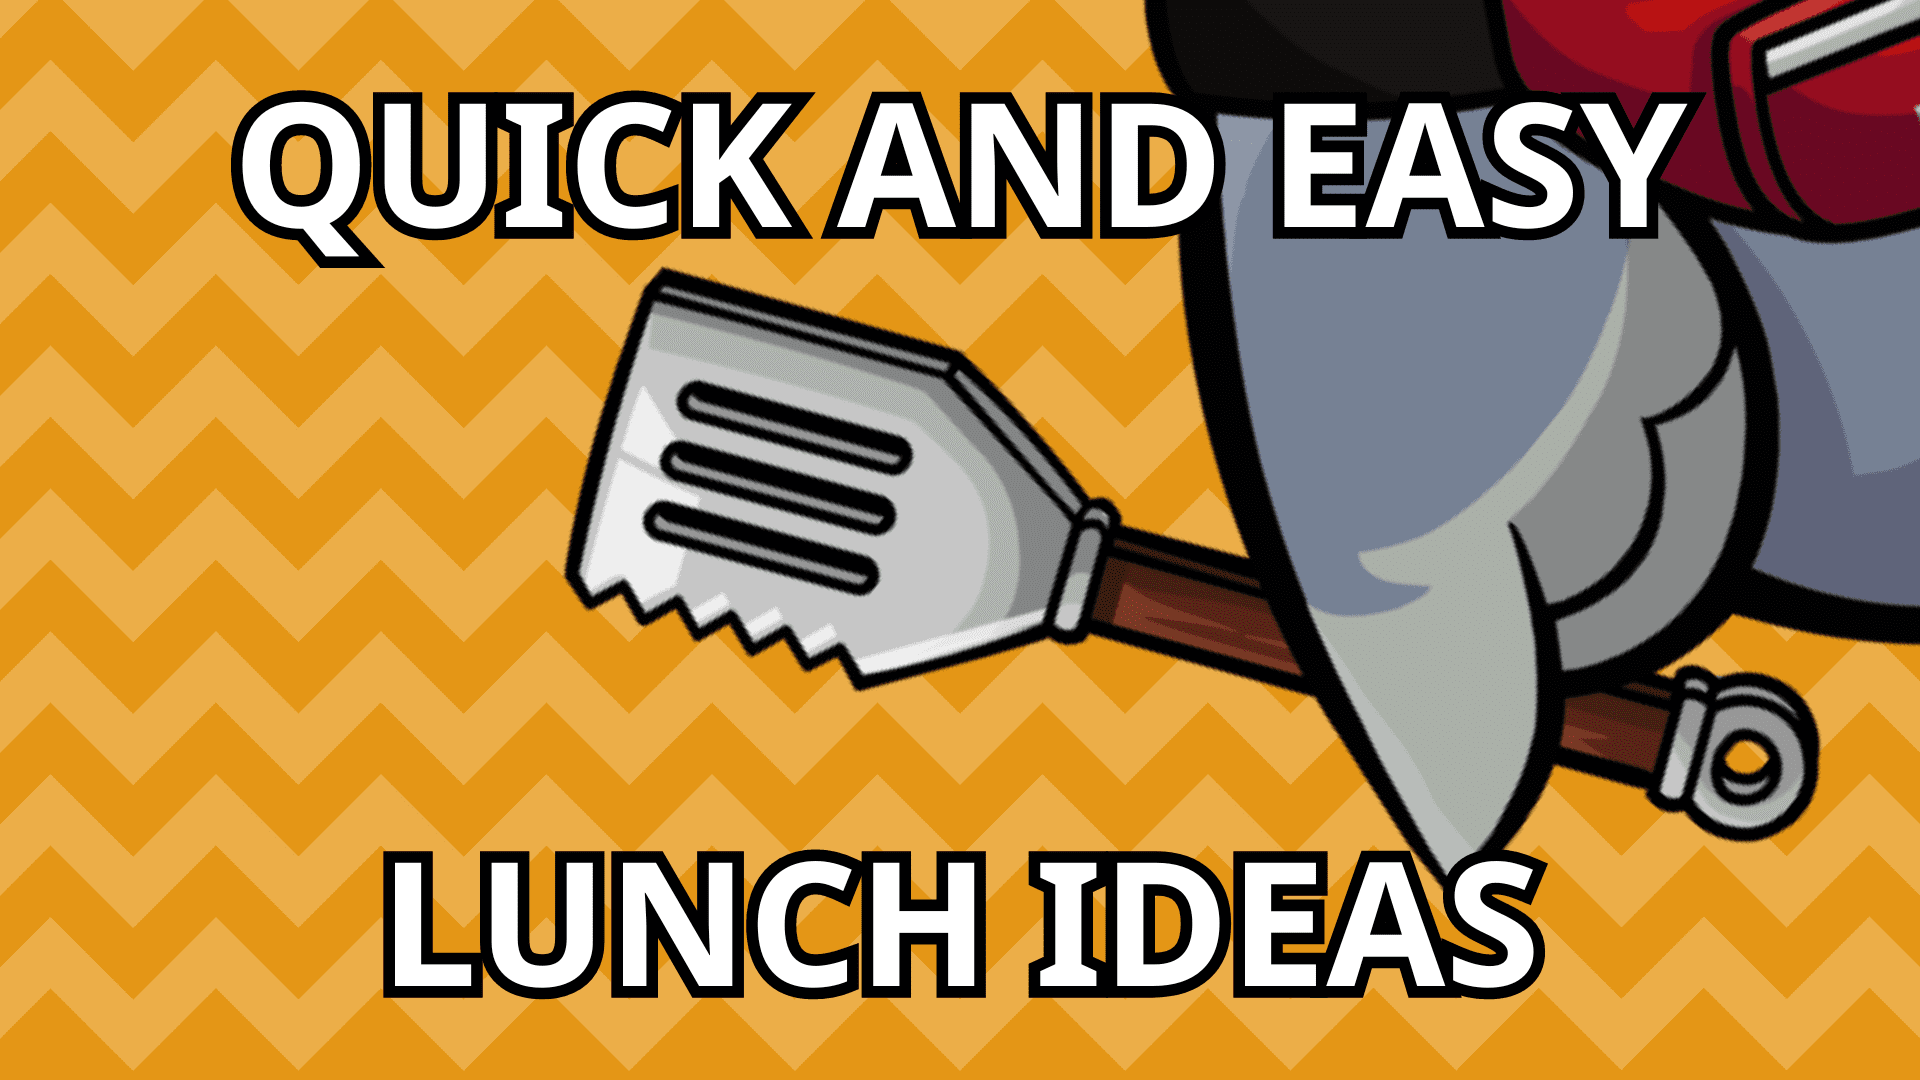 A grey parrot holds a steel spatula in its wing in front of an orange zigzag background. This depicts our quick and easy lunch ideas for kids.